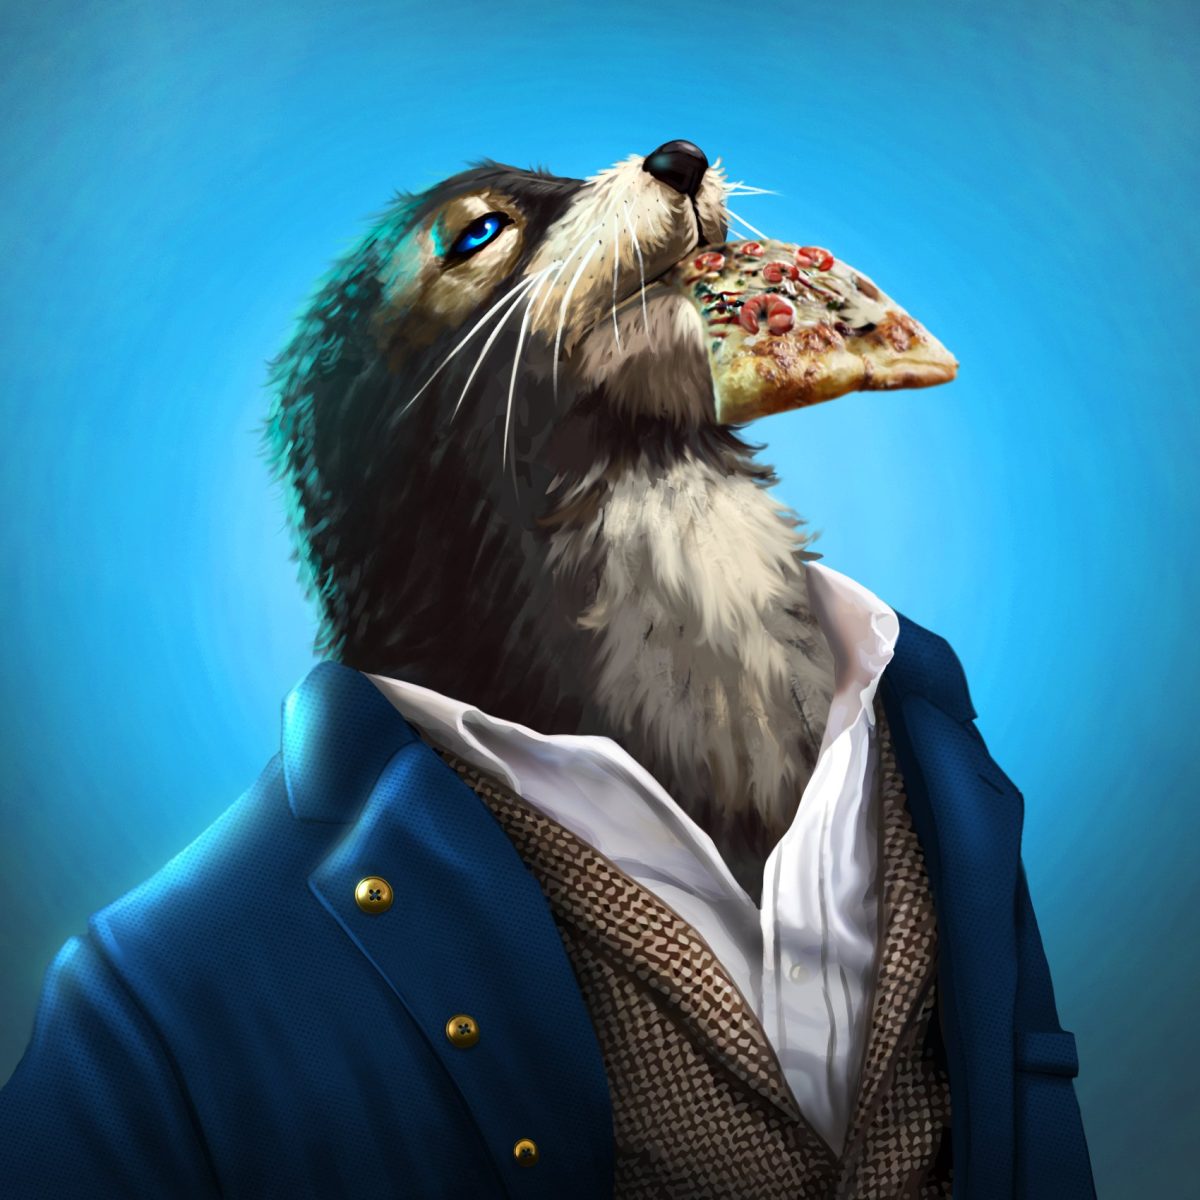 animated seal wearing a suit eating a pizza